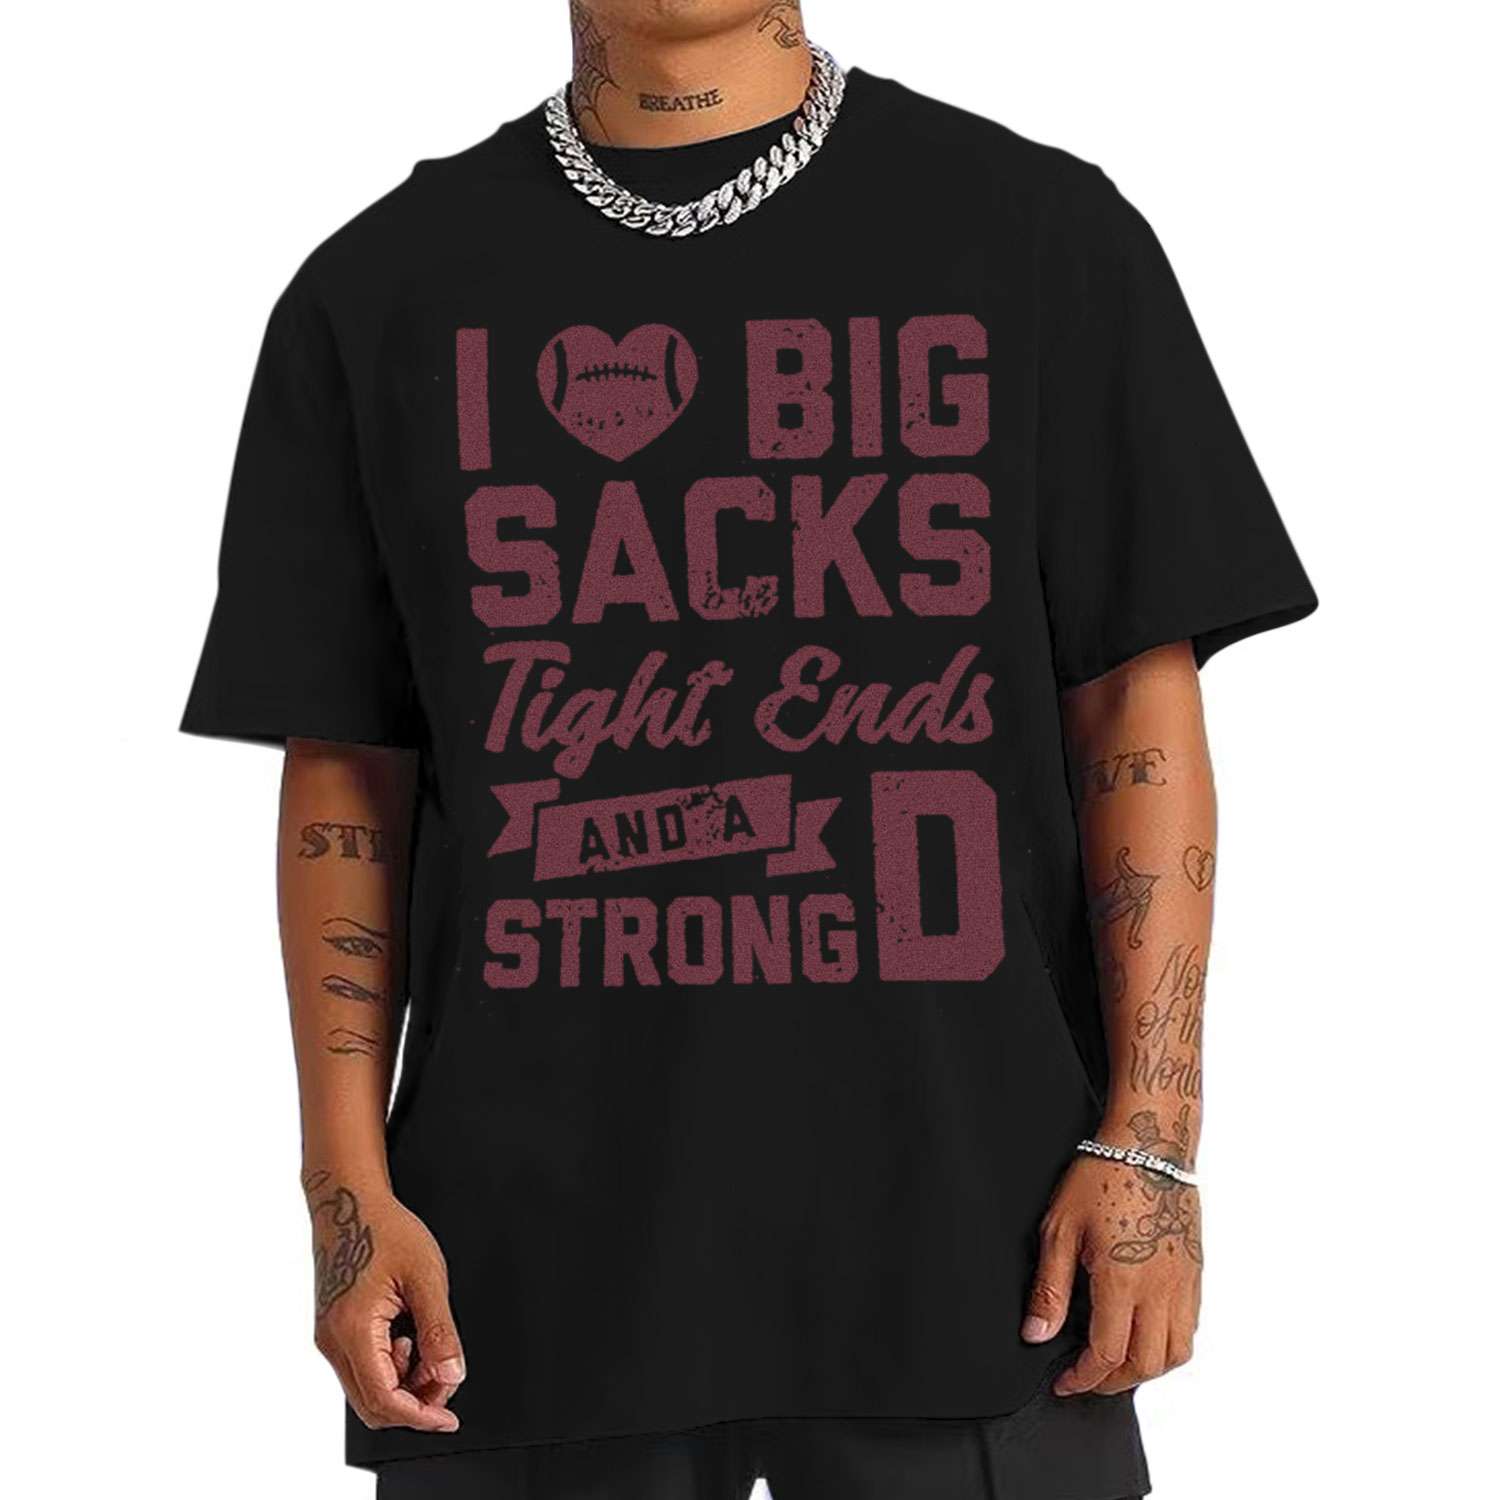 I Love Big Sacks Tight Ends and A Strong D T-shirt